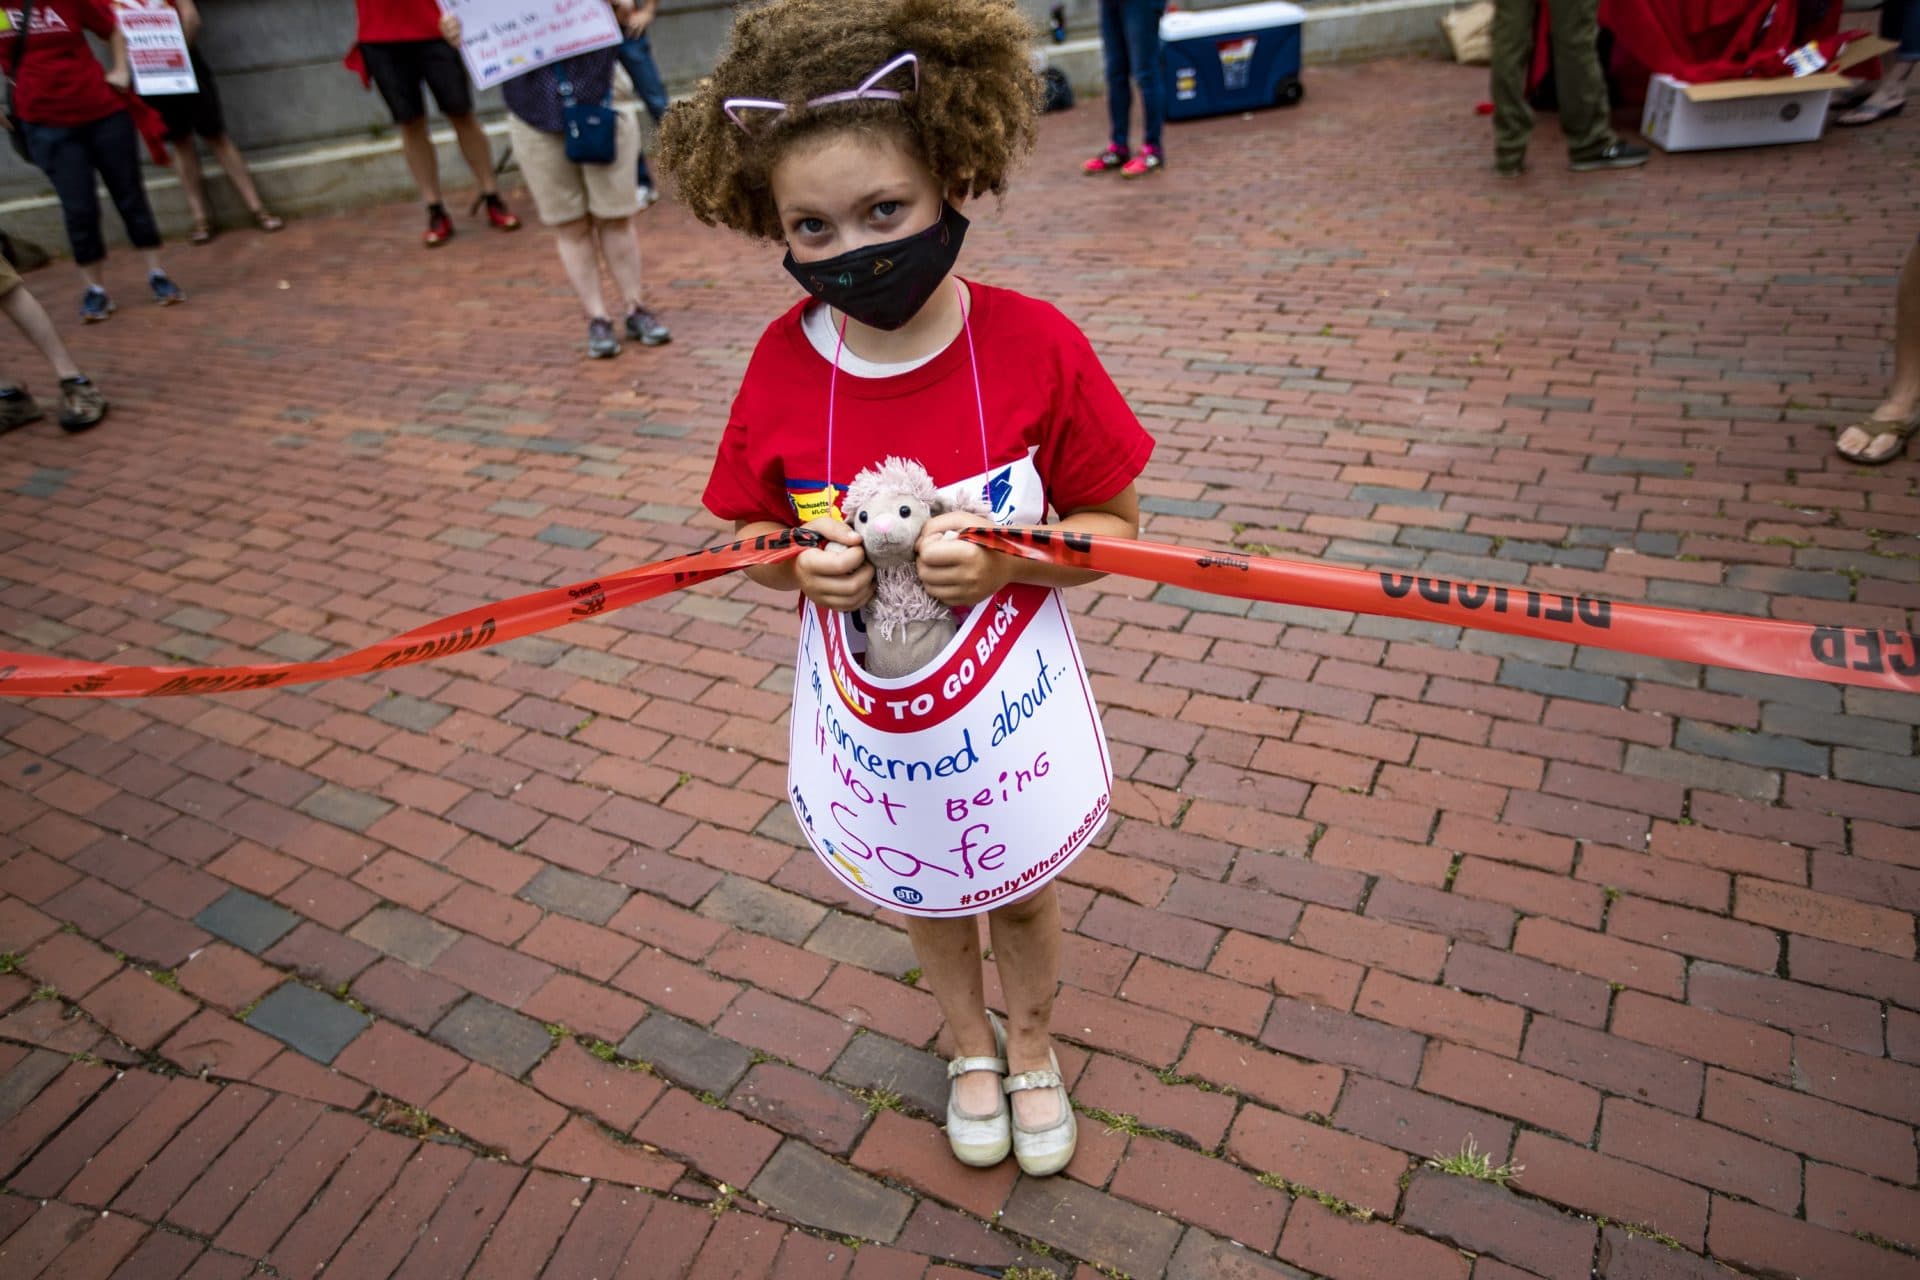 Ella James Burg Power, 7, of Worcester holds a sign that reads “I’m concerned about not being safe” during a rally demanding Gov. Charlie Baker to safely reopen schools being held by the Massachusetts Teachers Union at the State House. (Jesse Costa/WBUR)